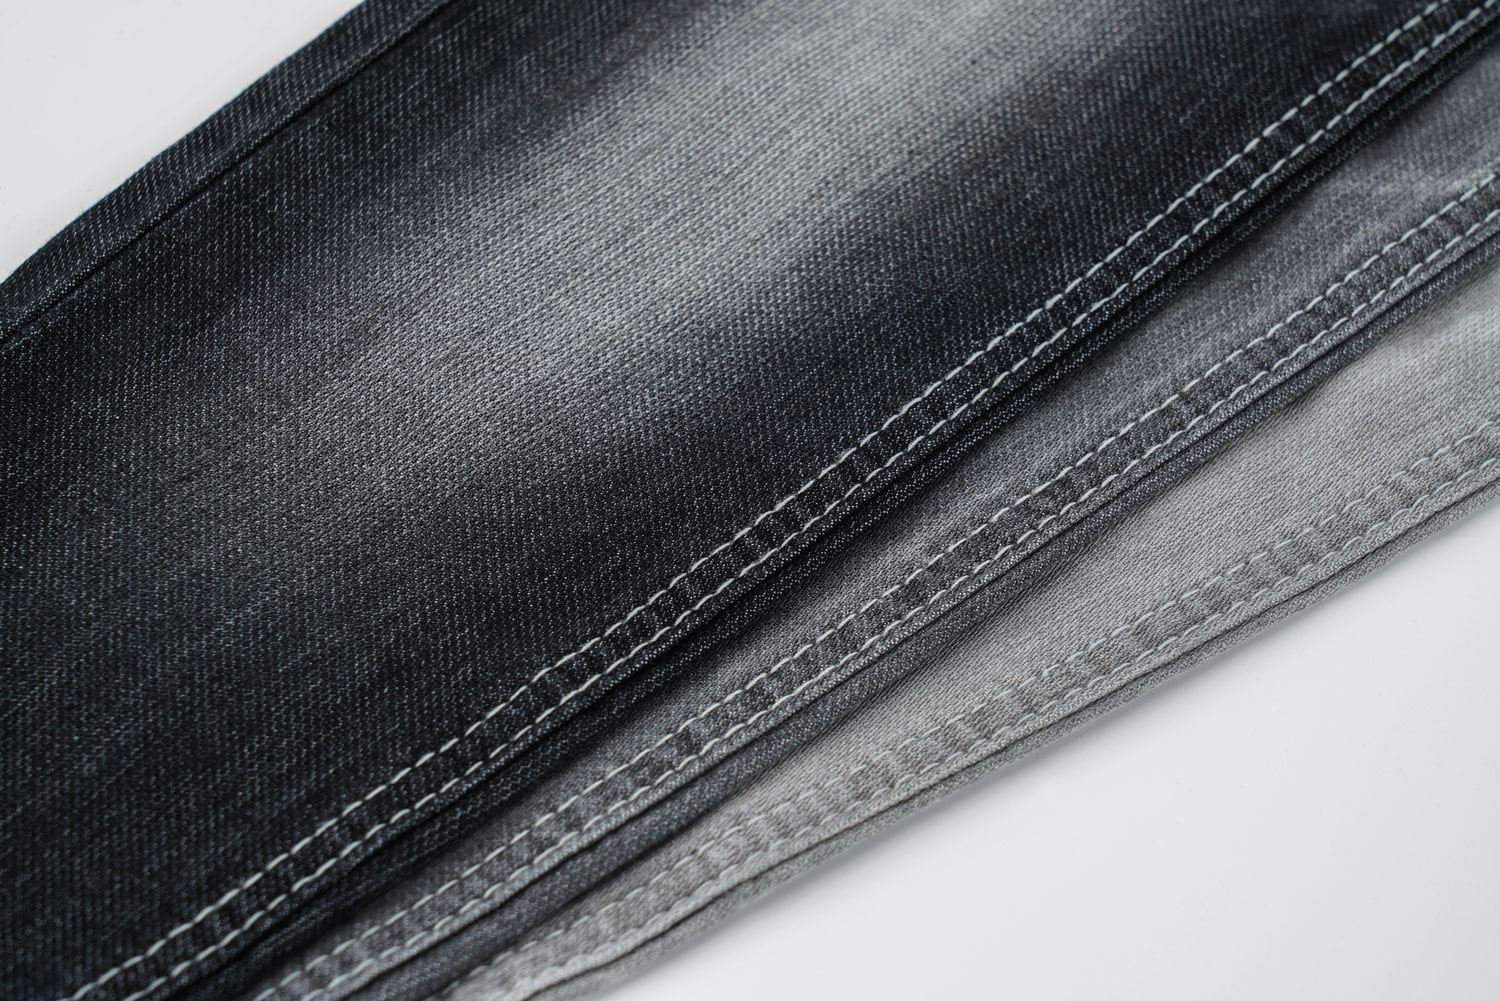 Denim Stretch Fabric Supplier Quality Affected by What Factors 1